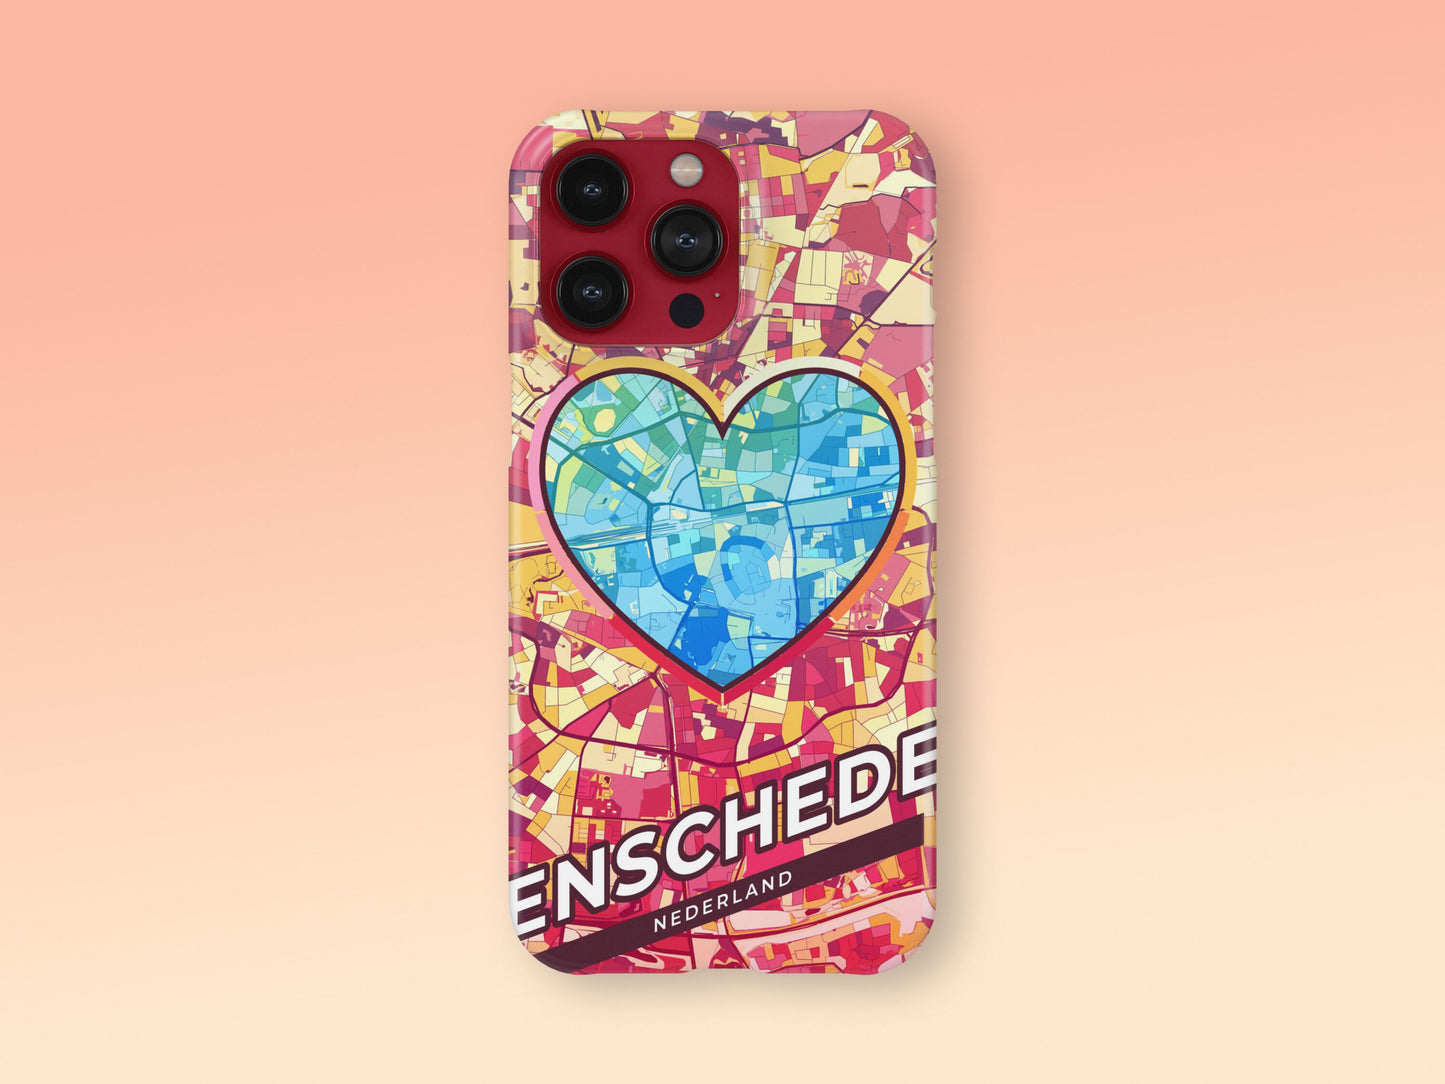 Enschede Netherlands slim phone case with colorful icon. Birthday, wedding or housewarming gift. Couple match cases. 2